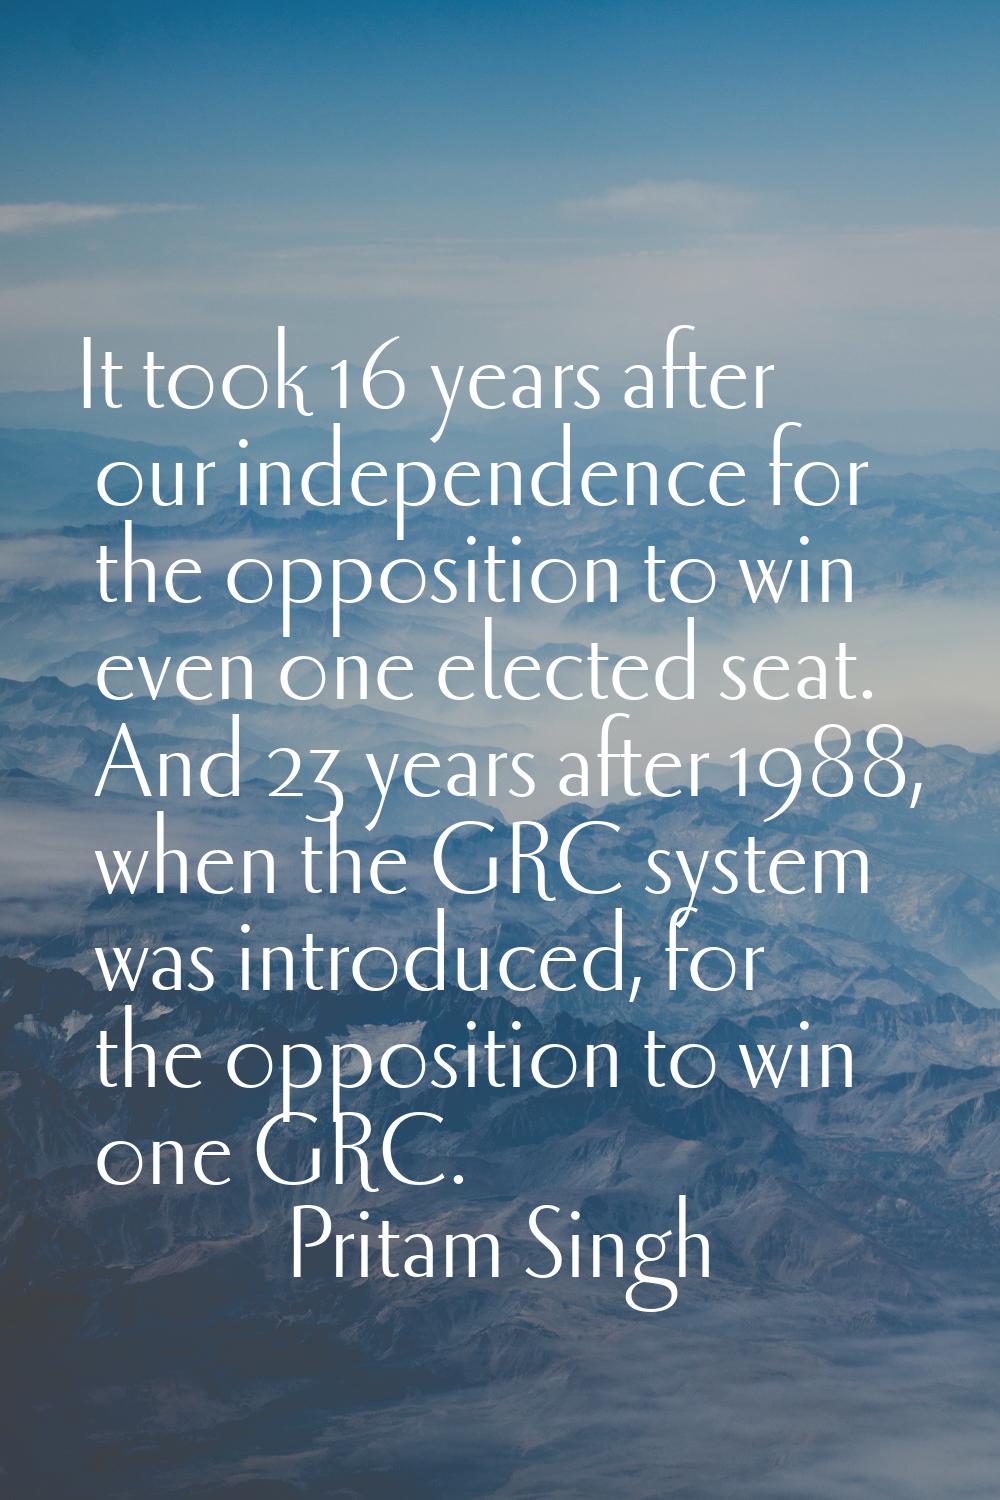 It took 16 years after our independence for the opposition to win even one elected seat. And 23 yea